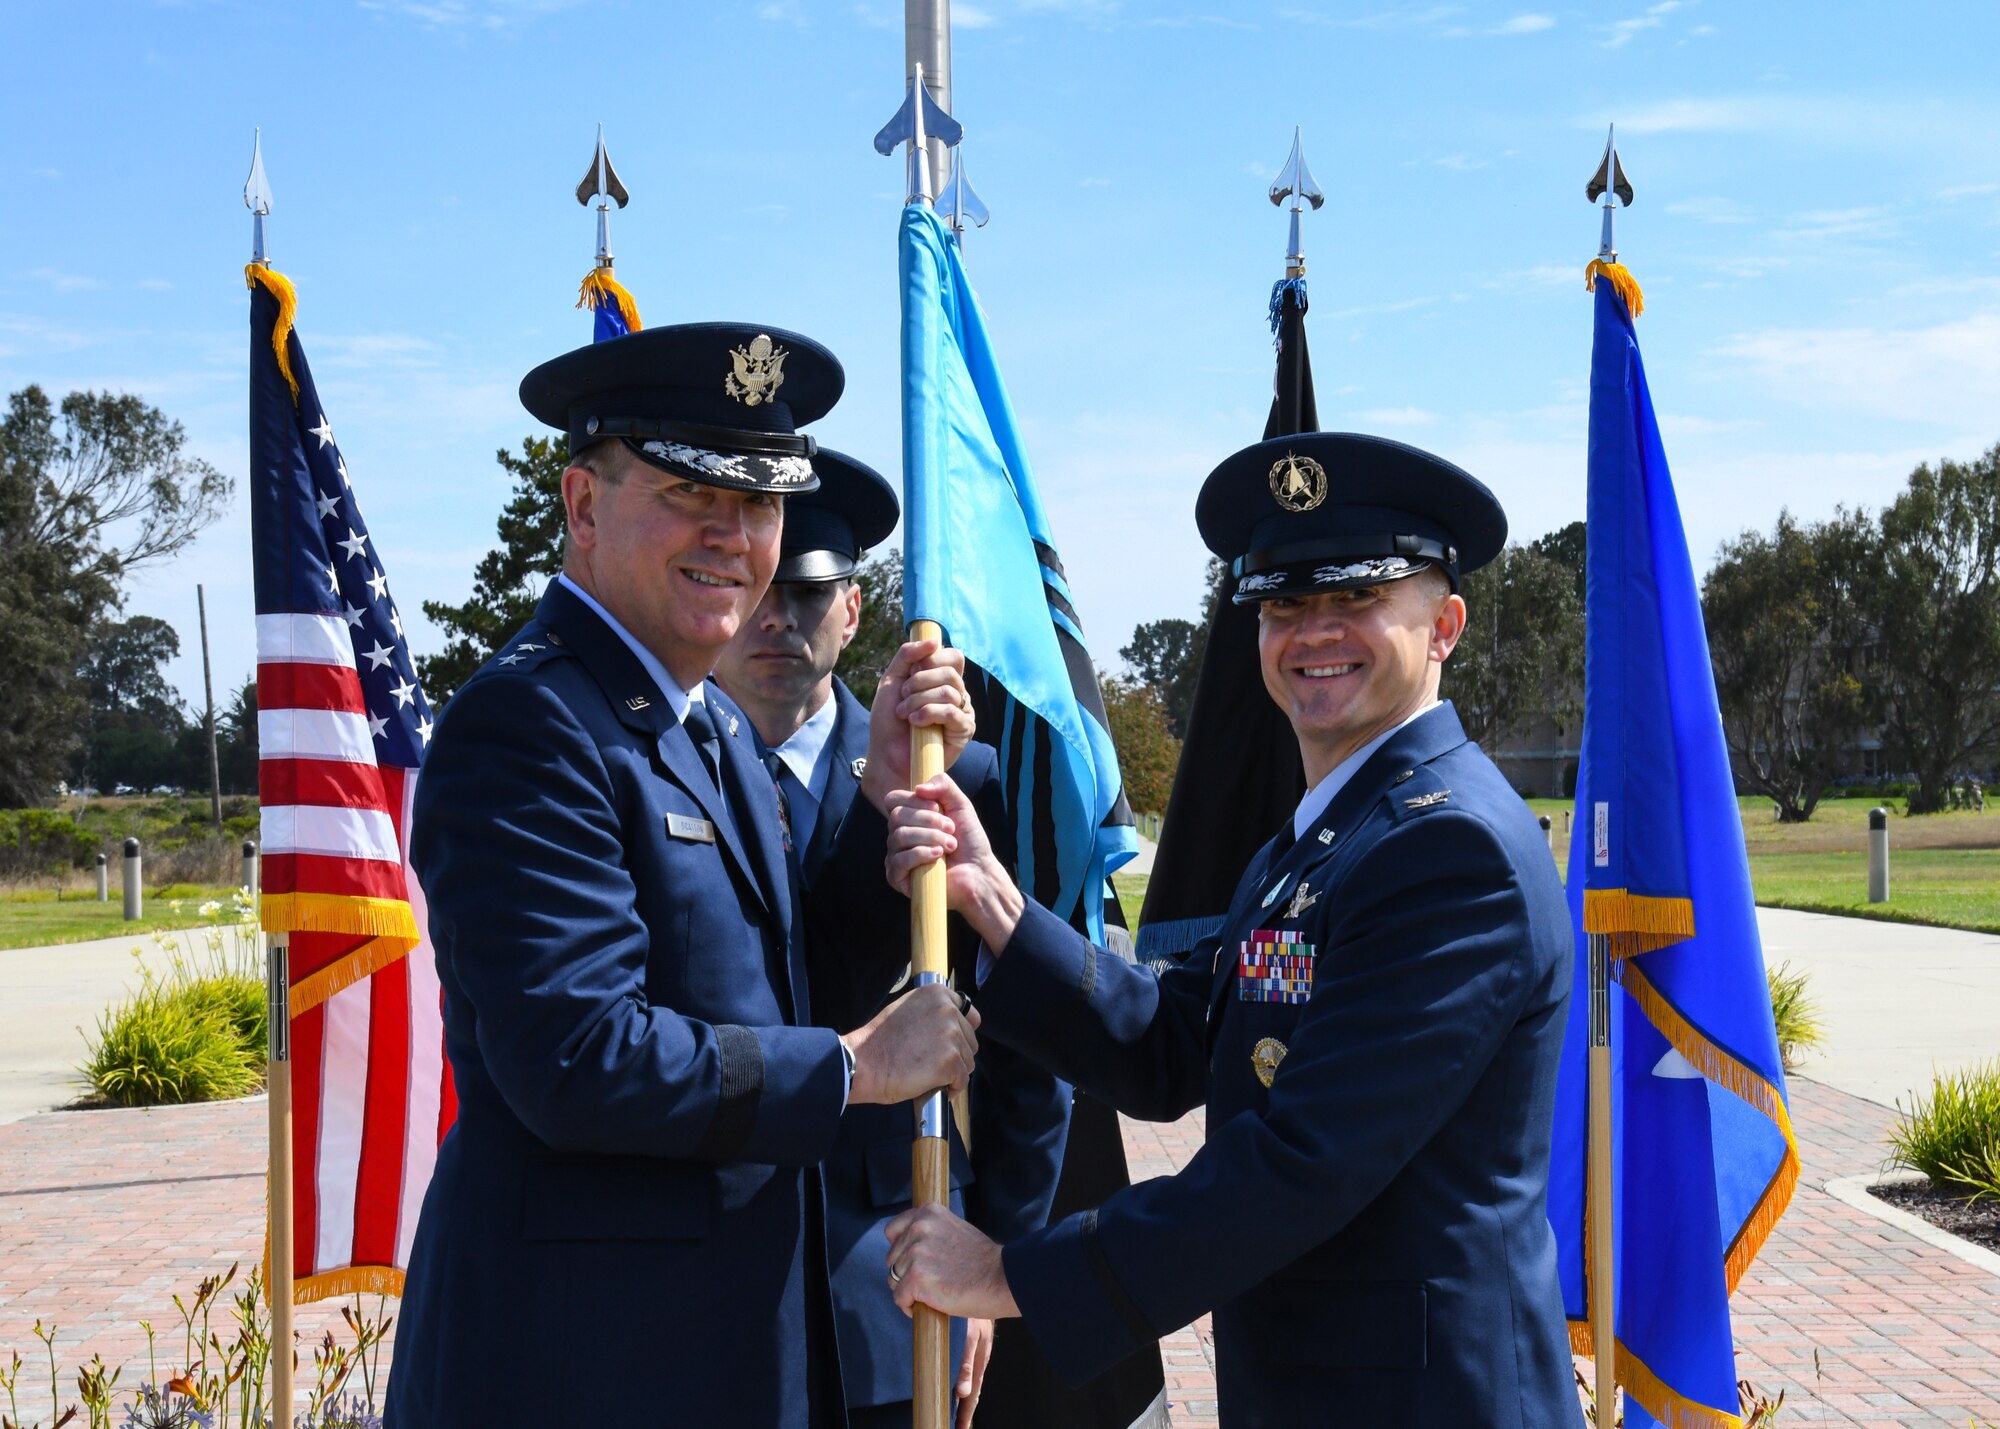 U.S. Air Force Maj. Gen. Shawn N. Bratton, Space Training and Readiness Command commander, passes the Delta 1 guidon to U.S. Space Force Col. Peter Norsky, incoming Delta 1 commander, during the Delta 1 change of command ceremony at Vandenberg Space Force Base, Calif., July 17, 2023. Norsky was the Space Force Headquarters Staff Integration Division chief prior to taking command of Delta 1. (U.S. Space Force photo by Senior Airman Rocio Romo)